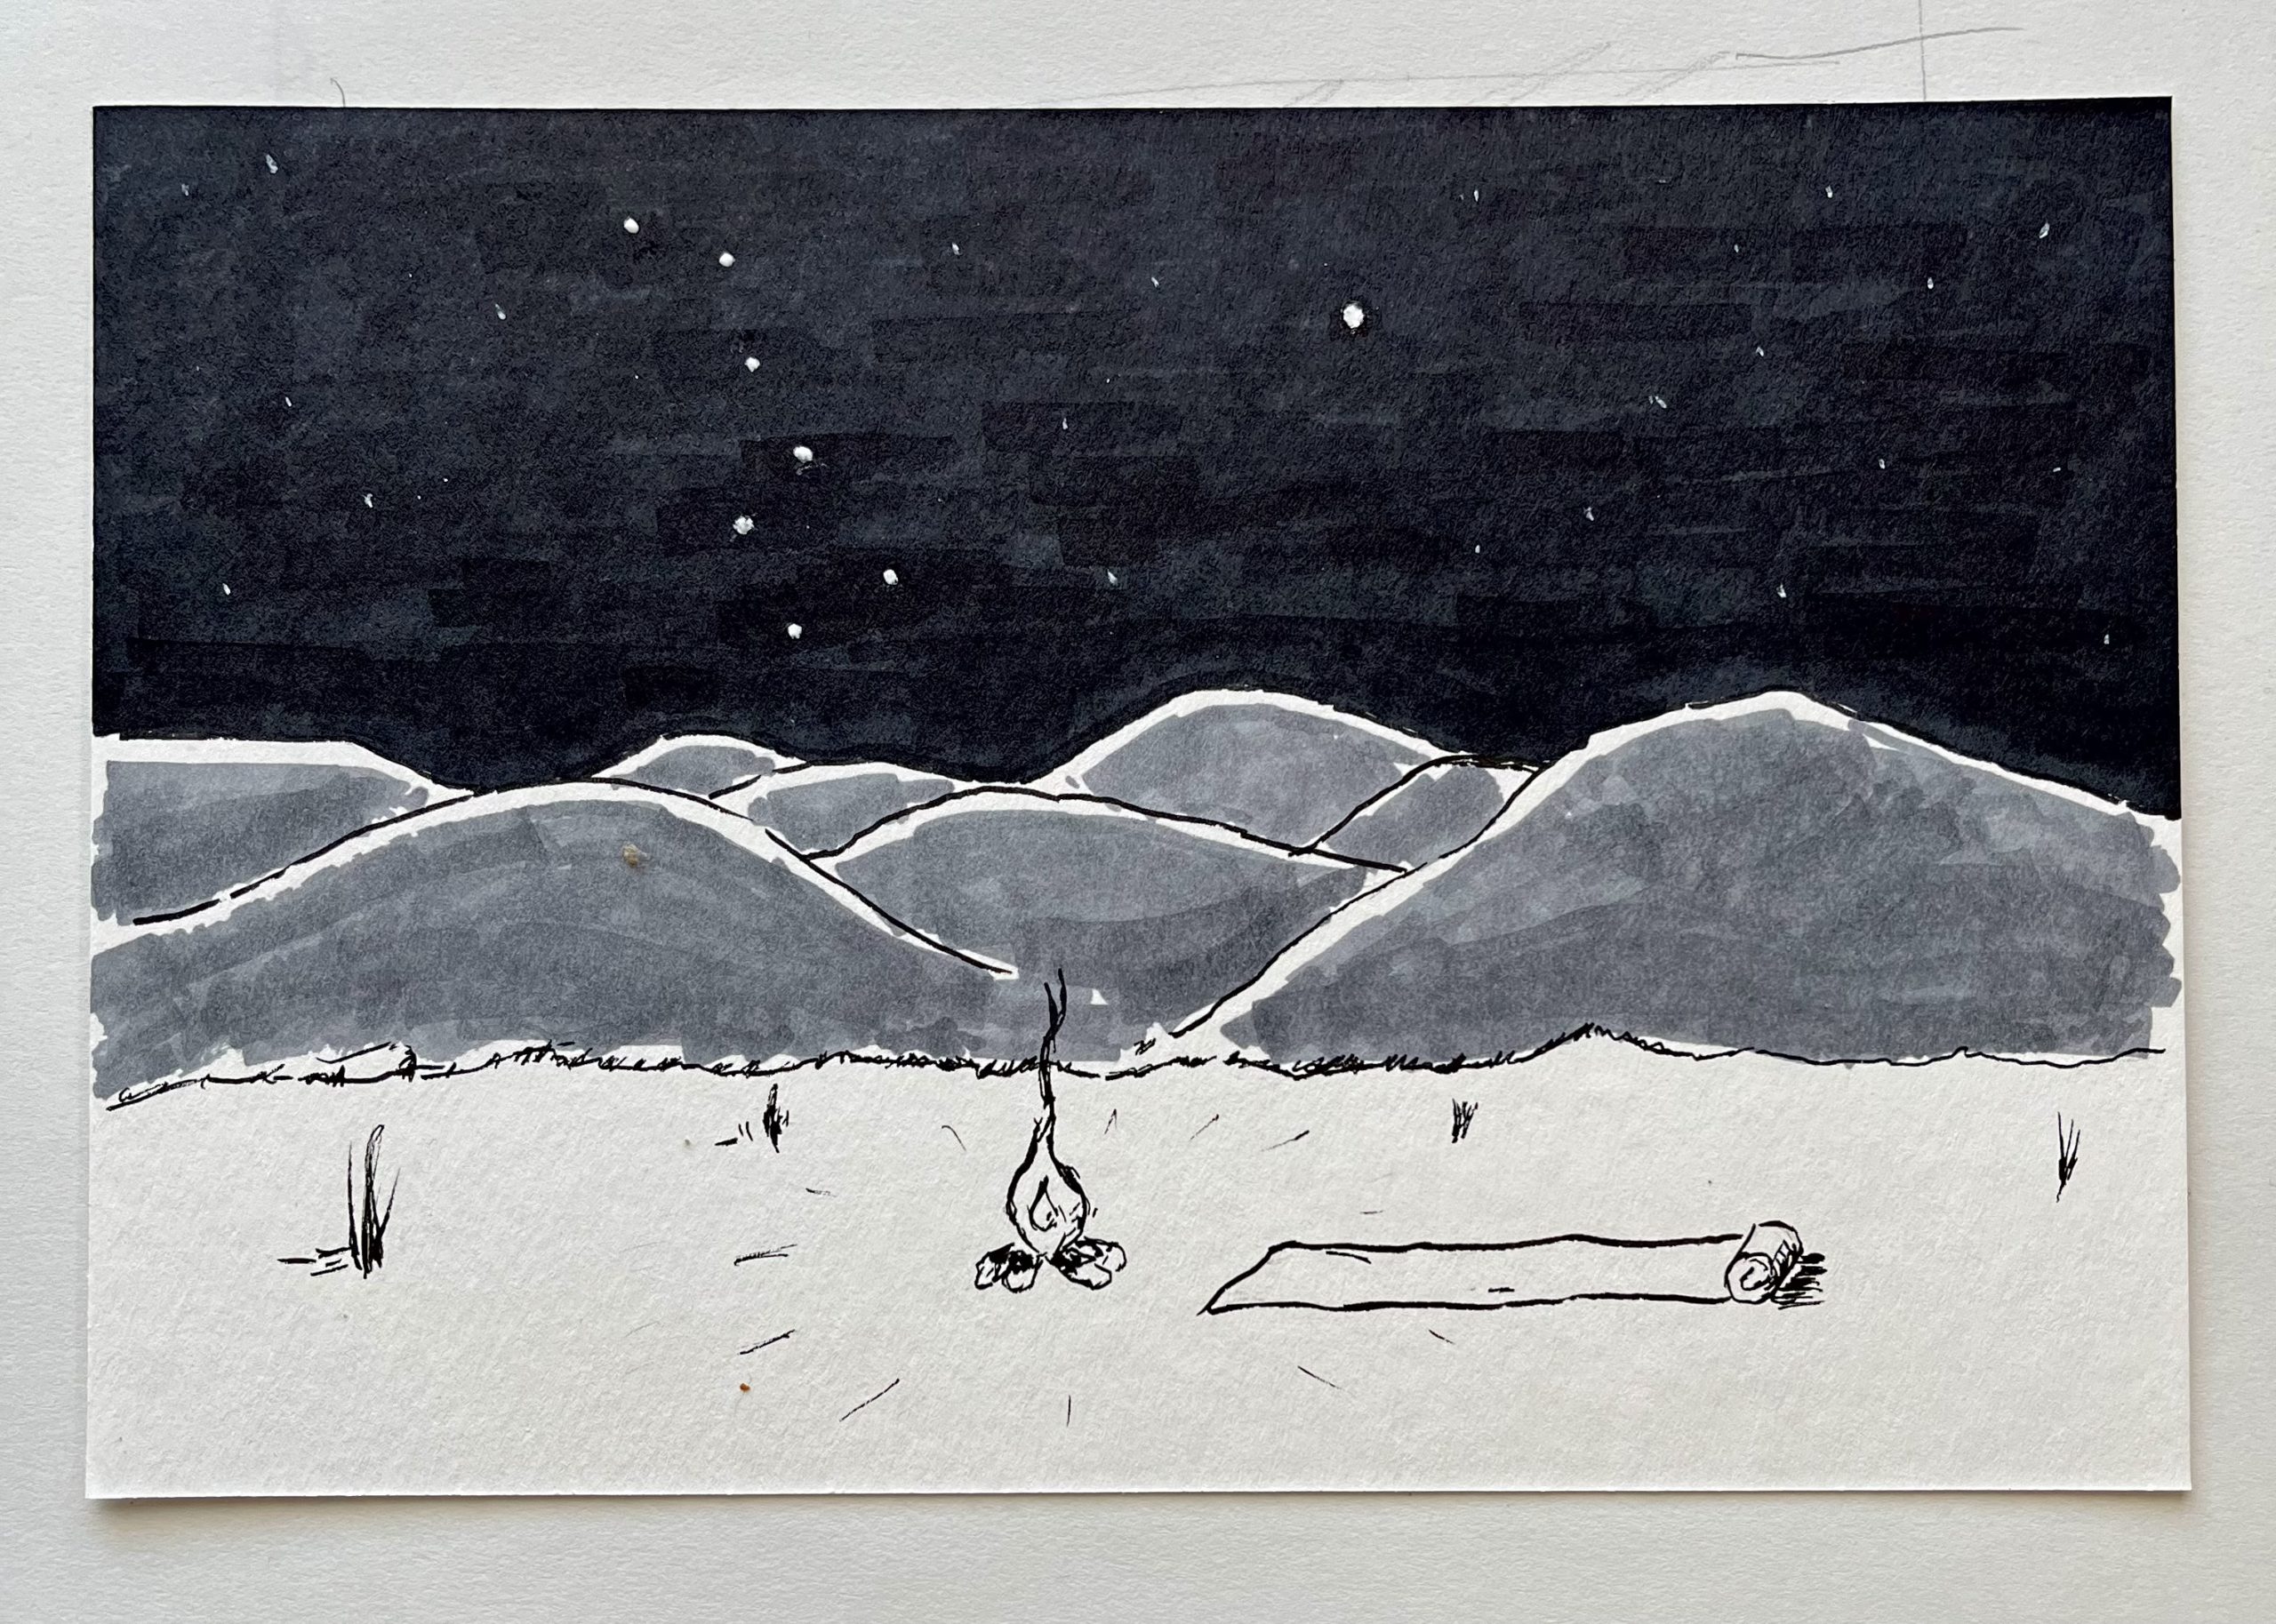 An ink drawing of a desert landscape at night with the Big Dipper and North Star made especially bright.